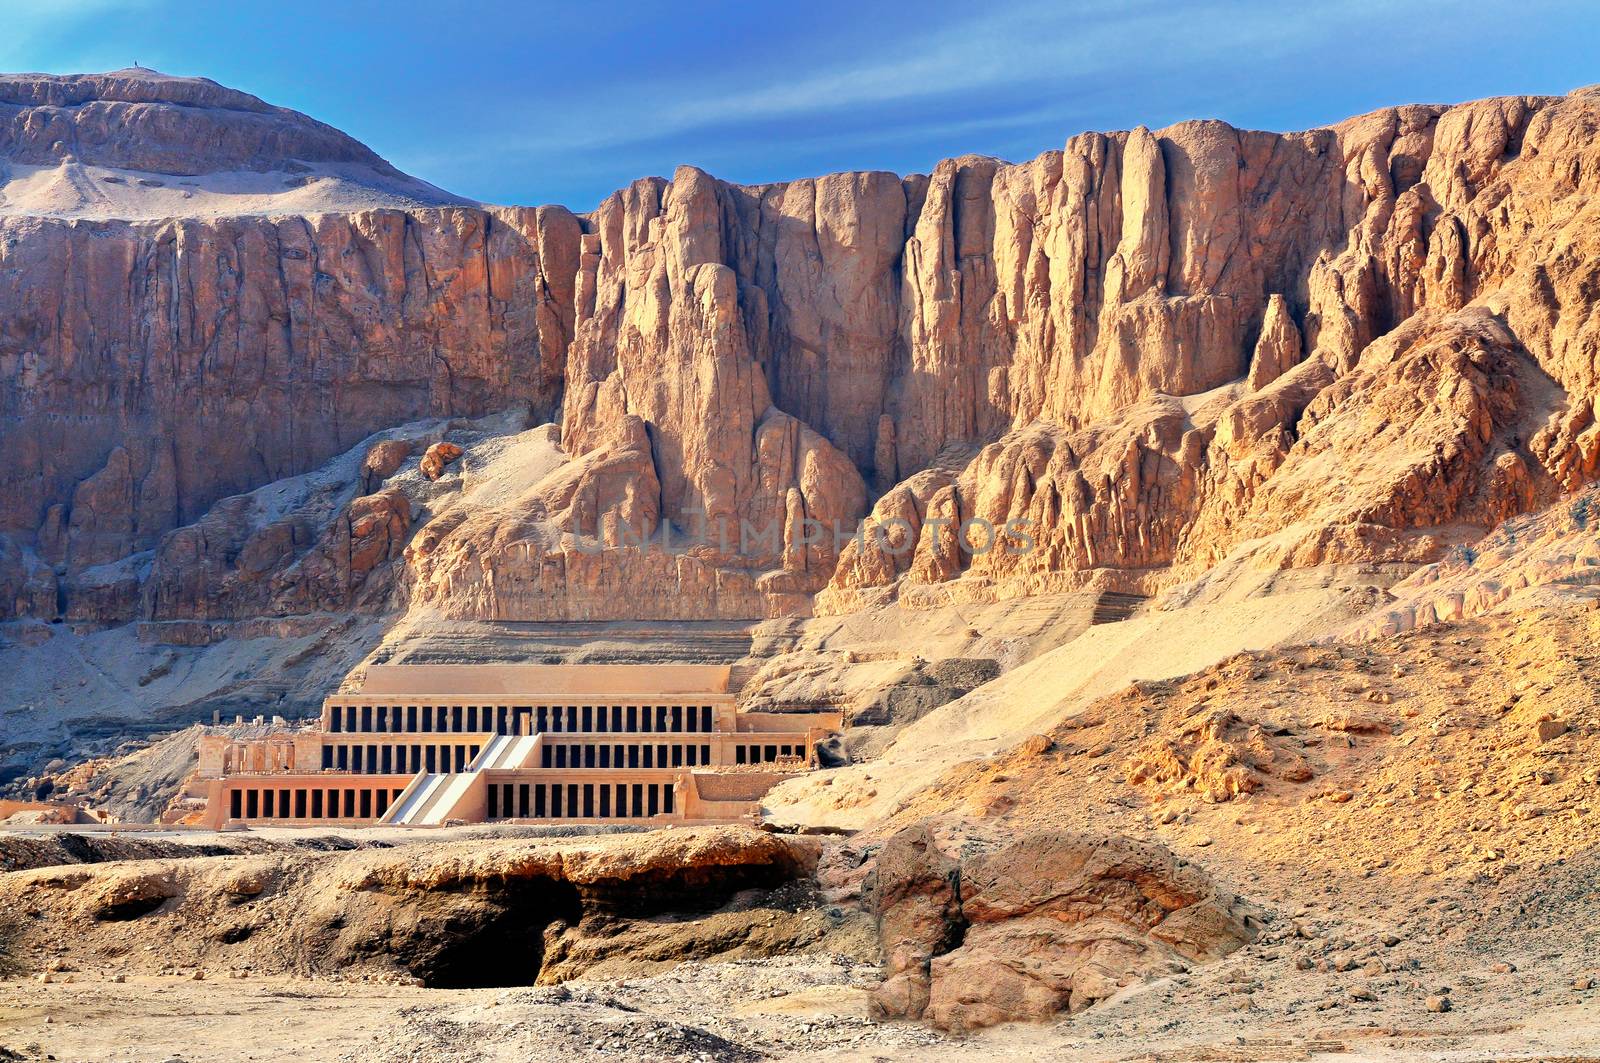 Hatshepsut Temple in the Valley of the Kings by MaxalTamor